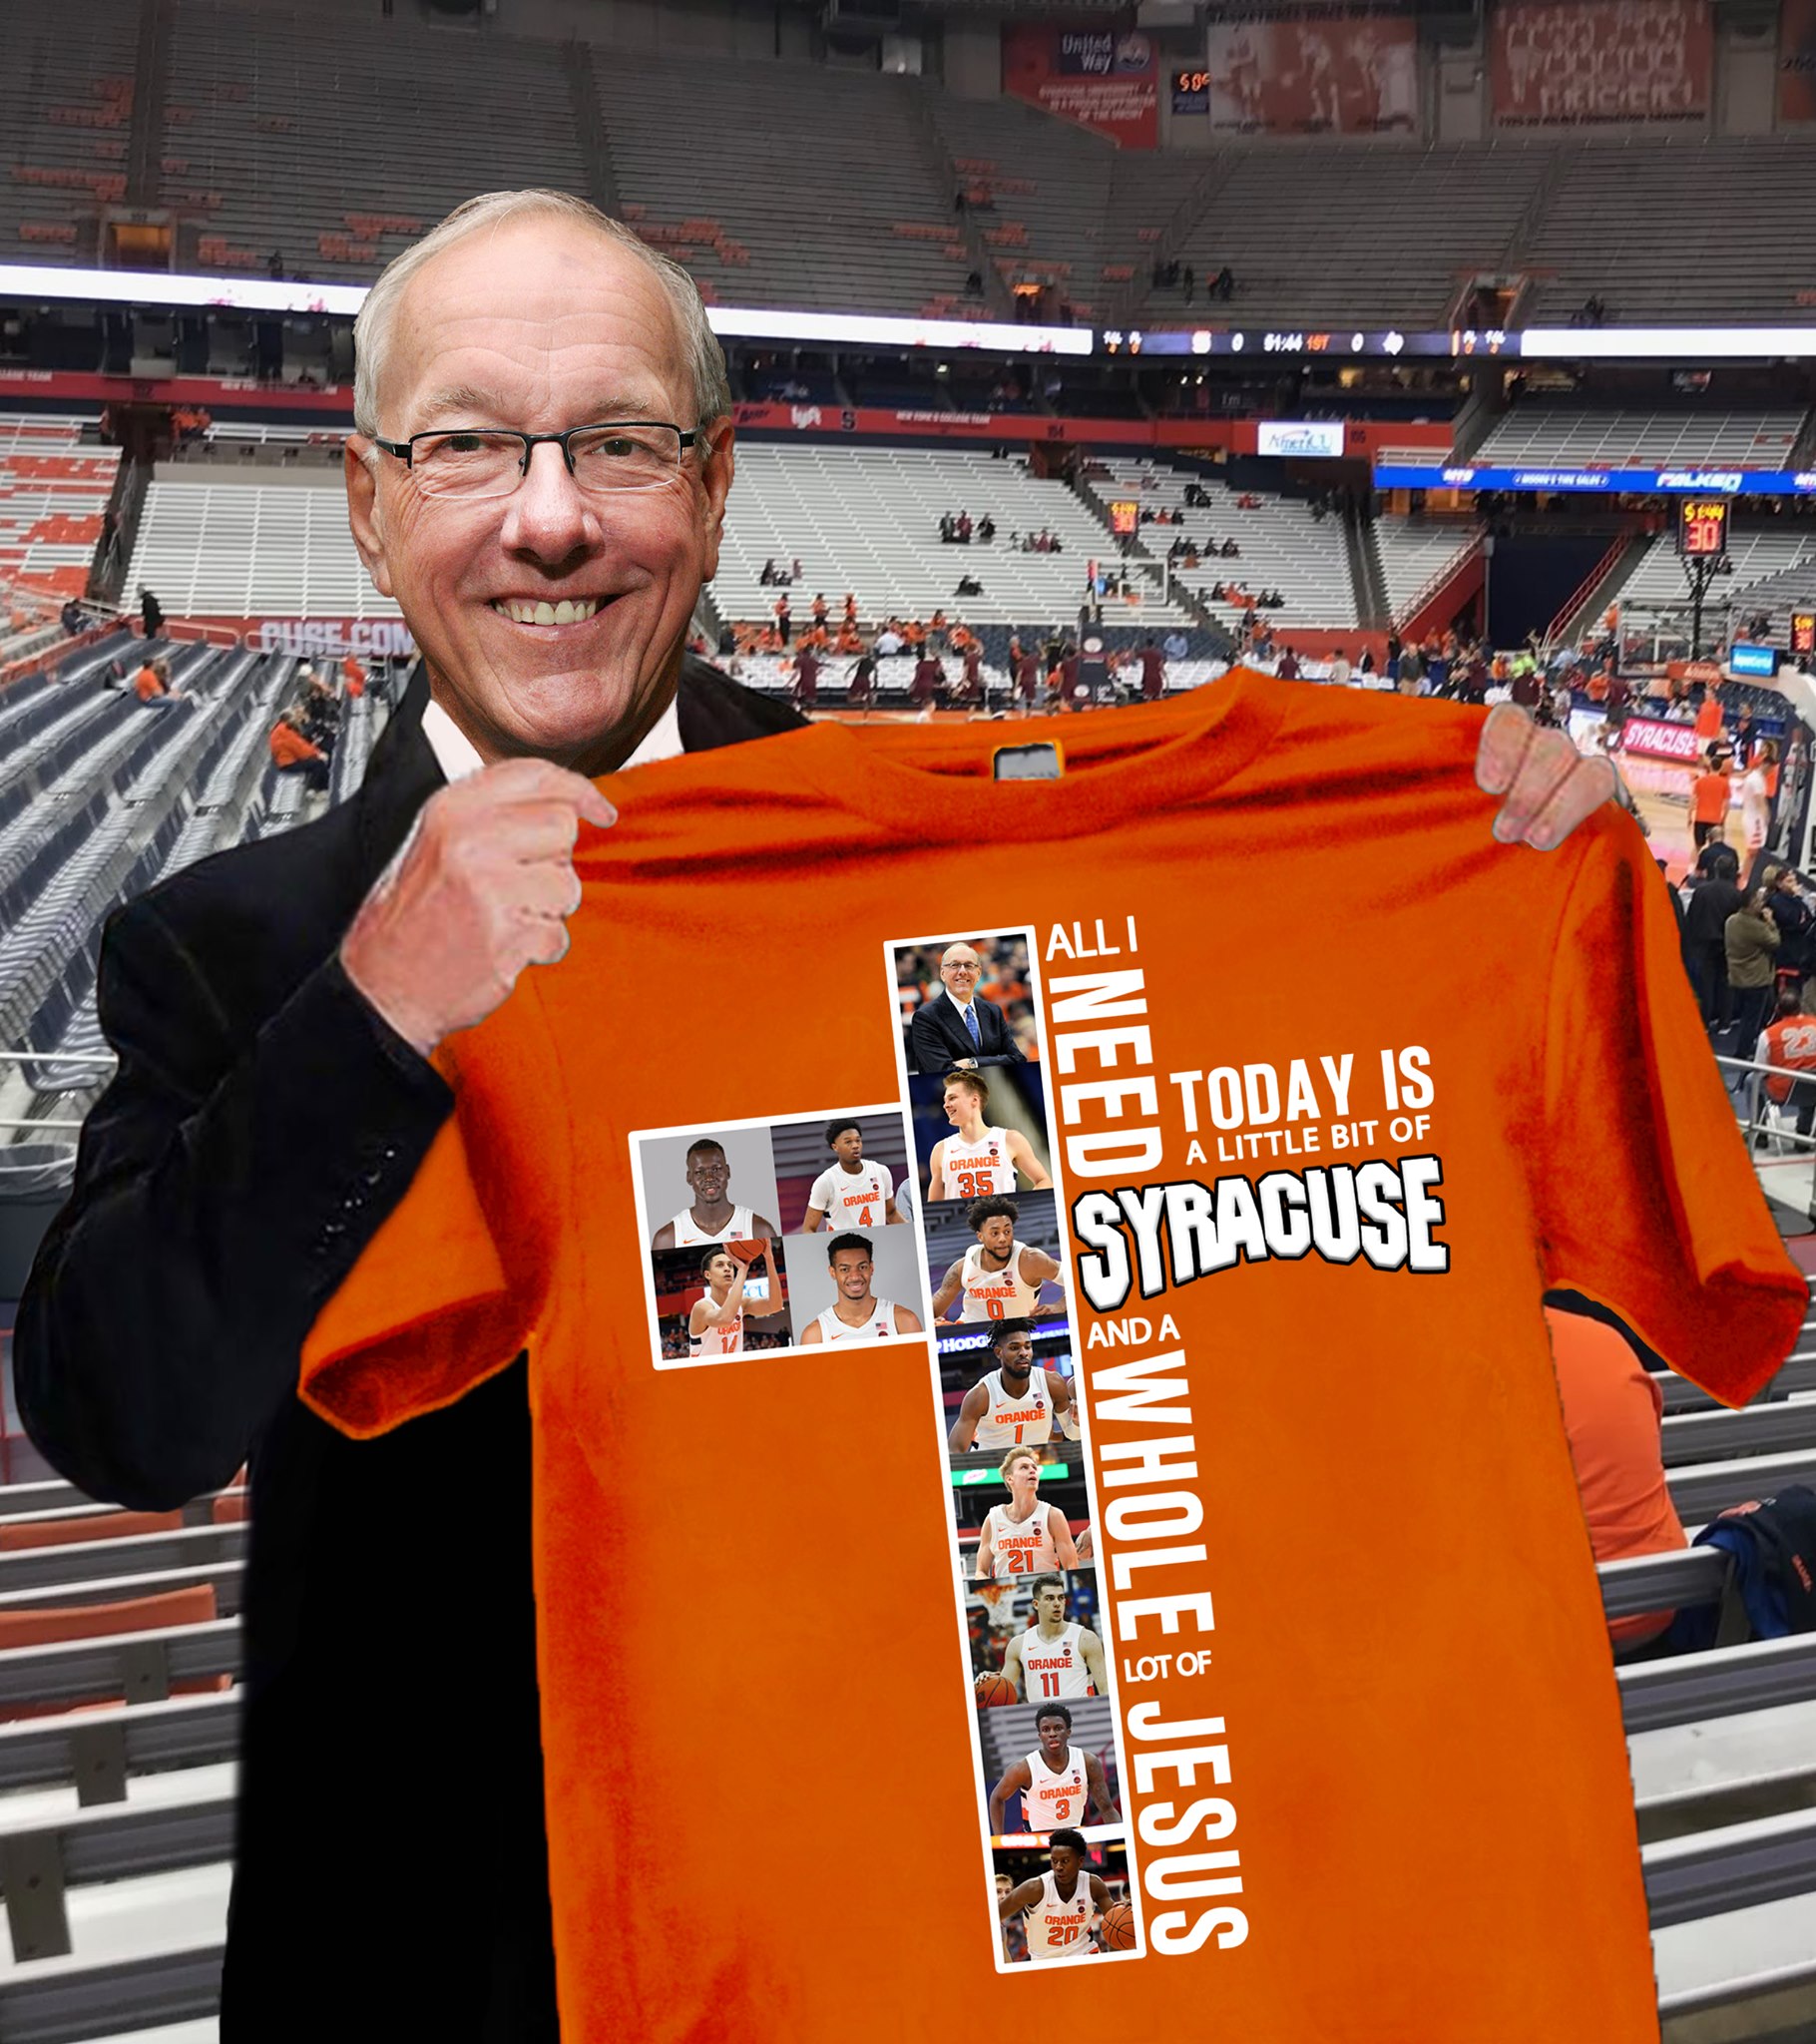 All i need today is a little bit of syracuse and a whole lot of Jesus